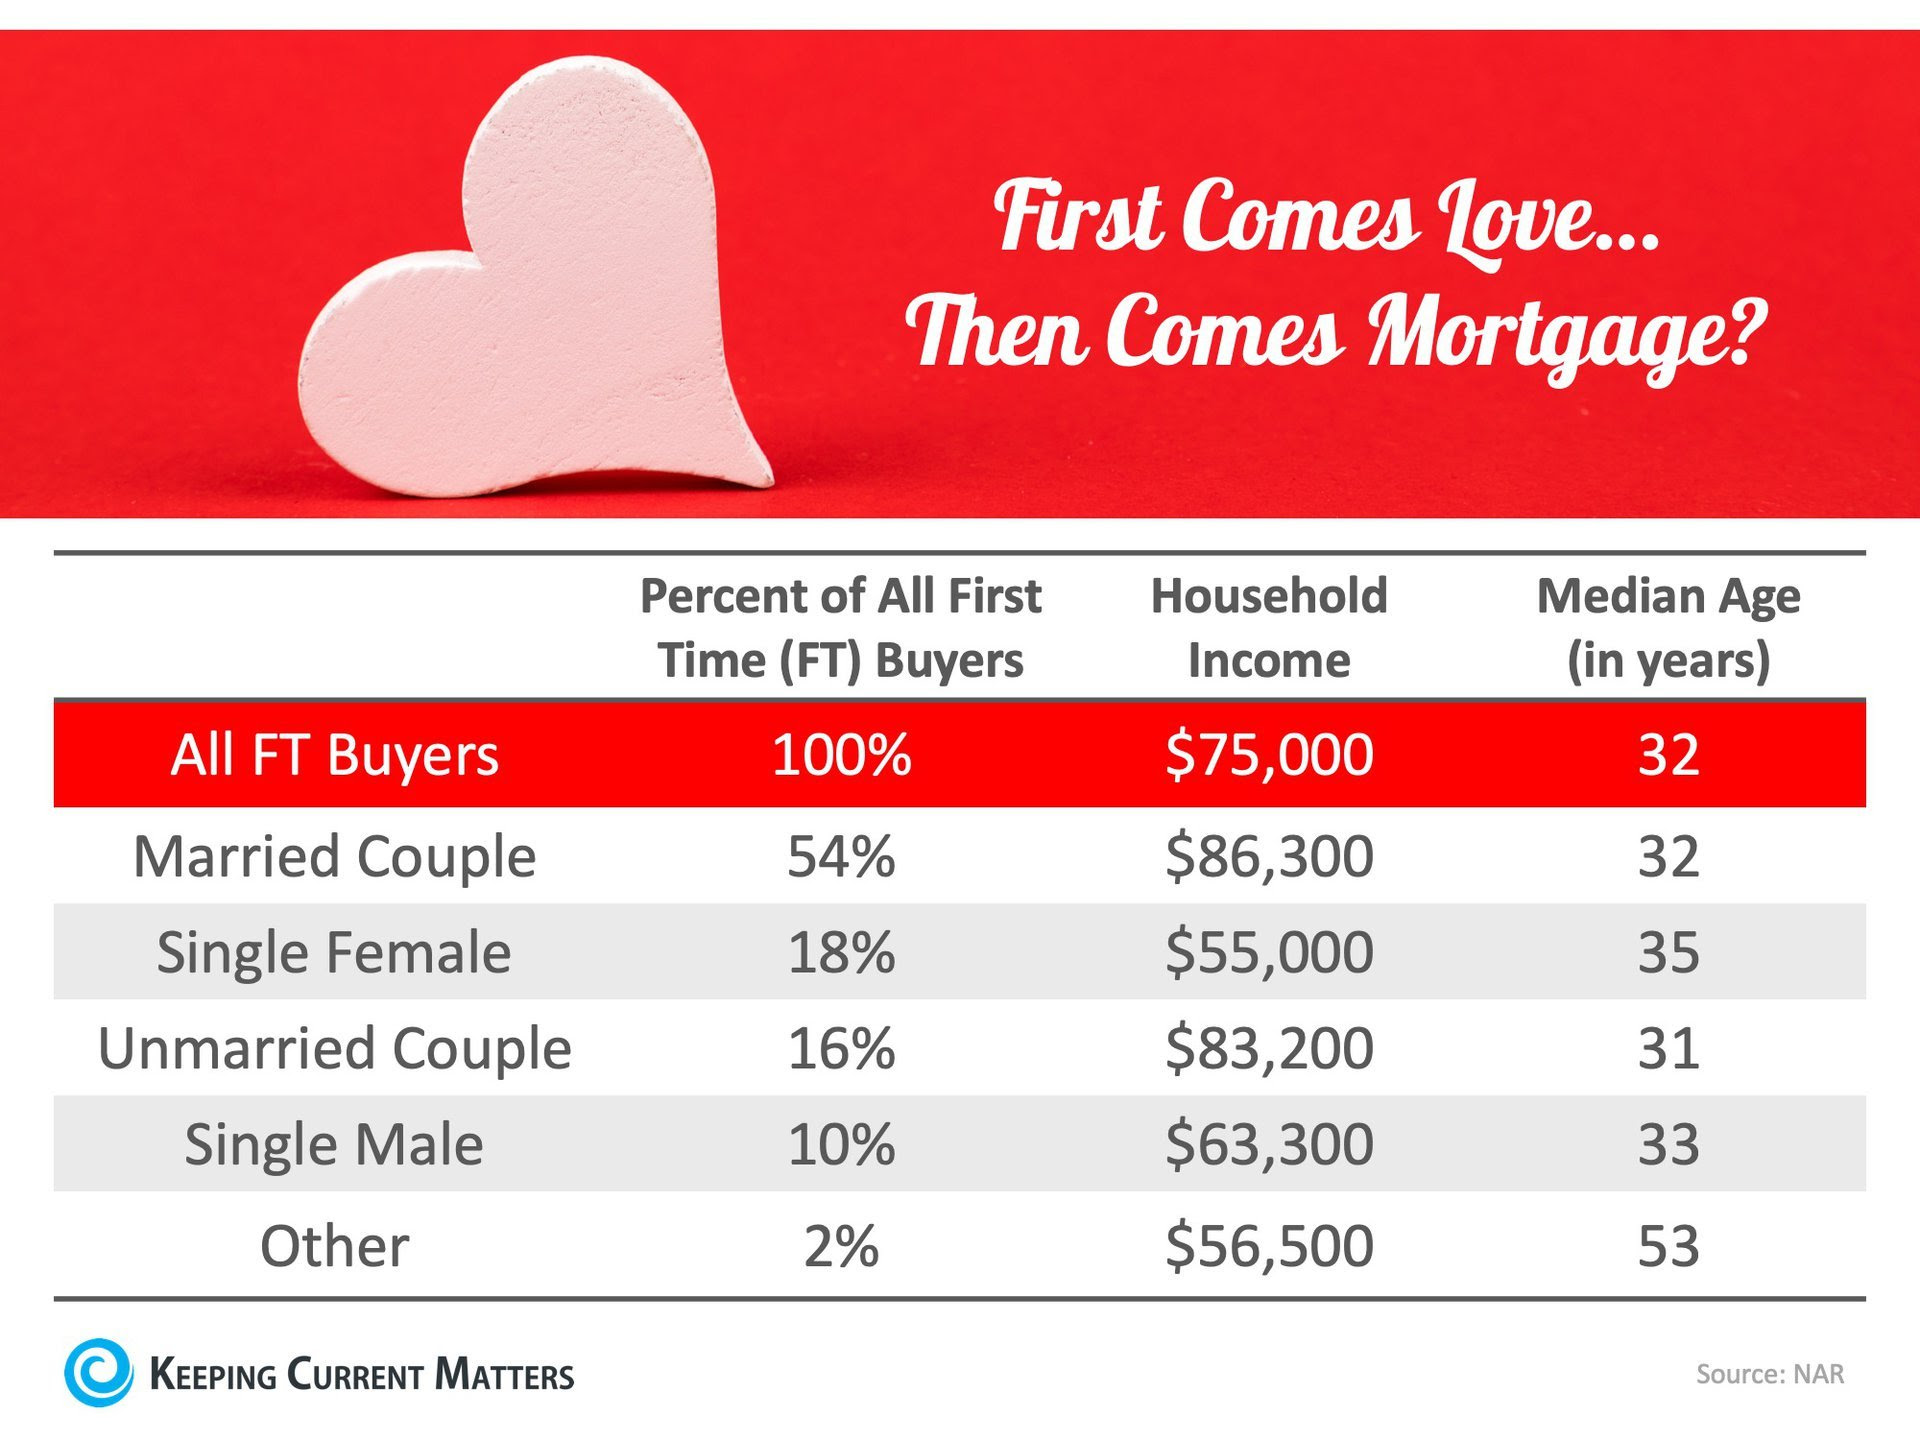 First Comes Love… Then Comes Mortgage? Couples Lead the Way | Keeping Current Matters